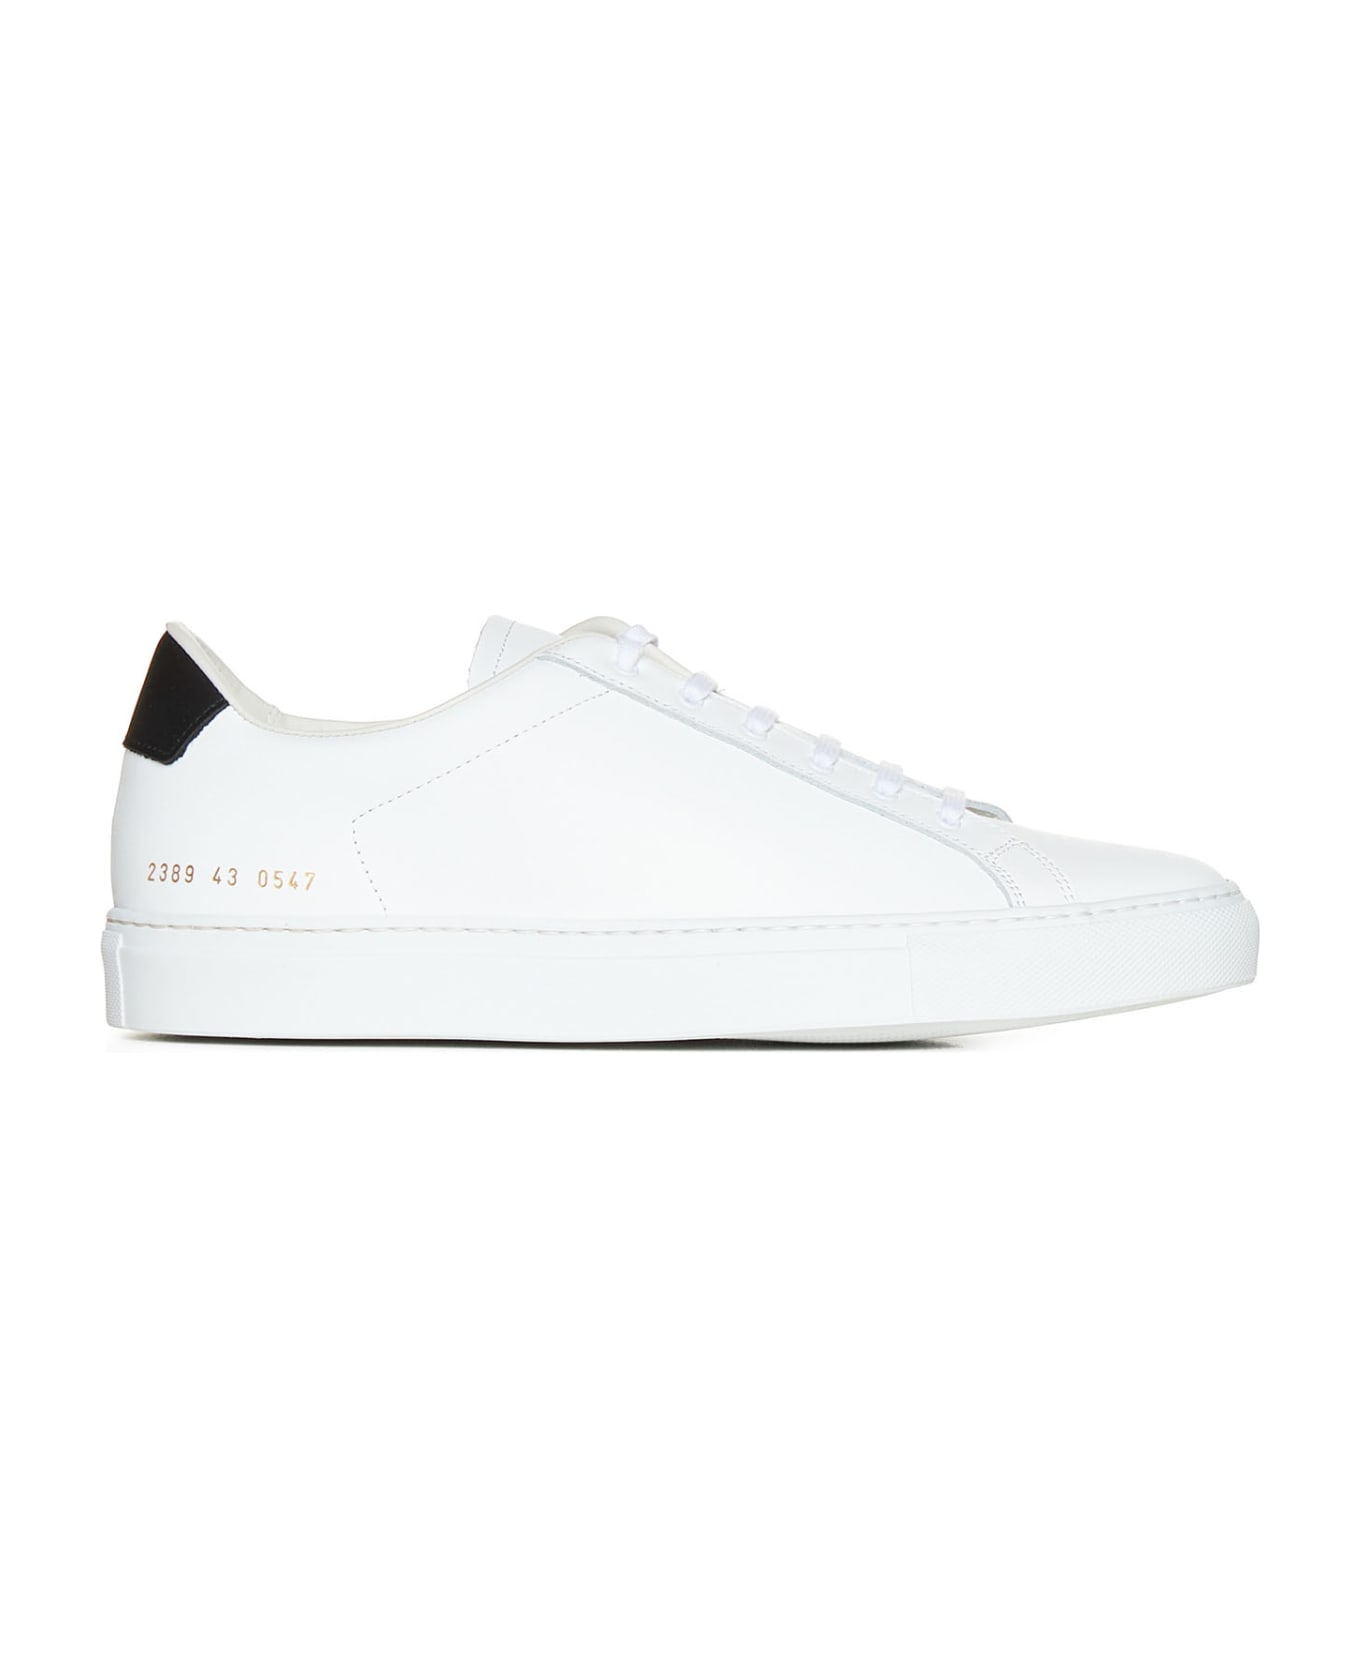 Common Projects White Leather Sneakers - White スニーカー